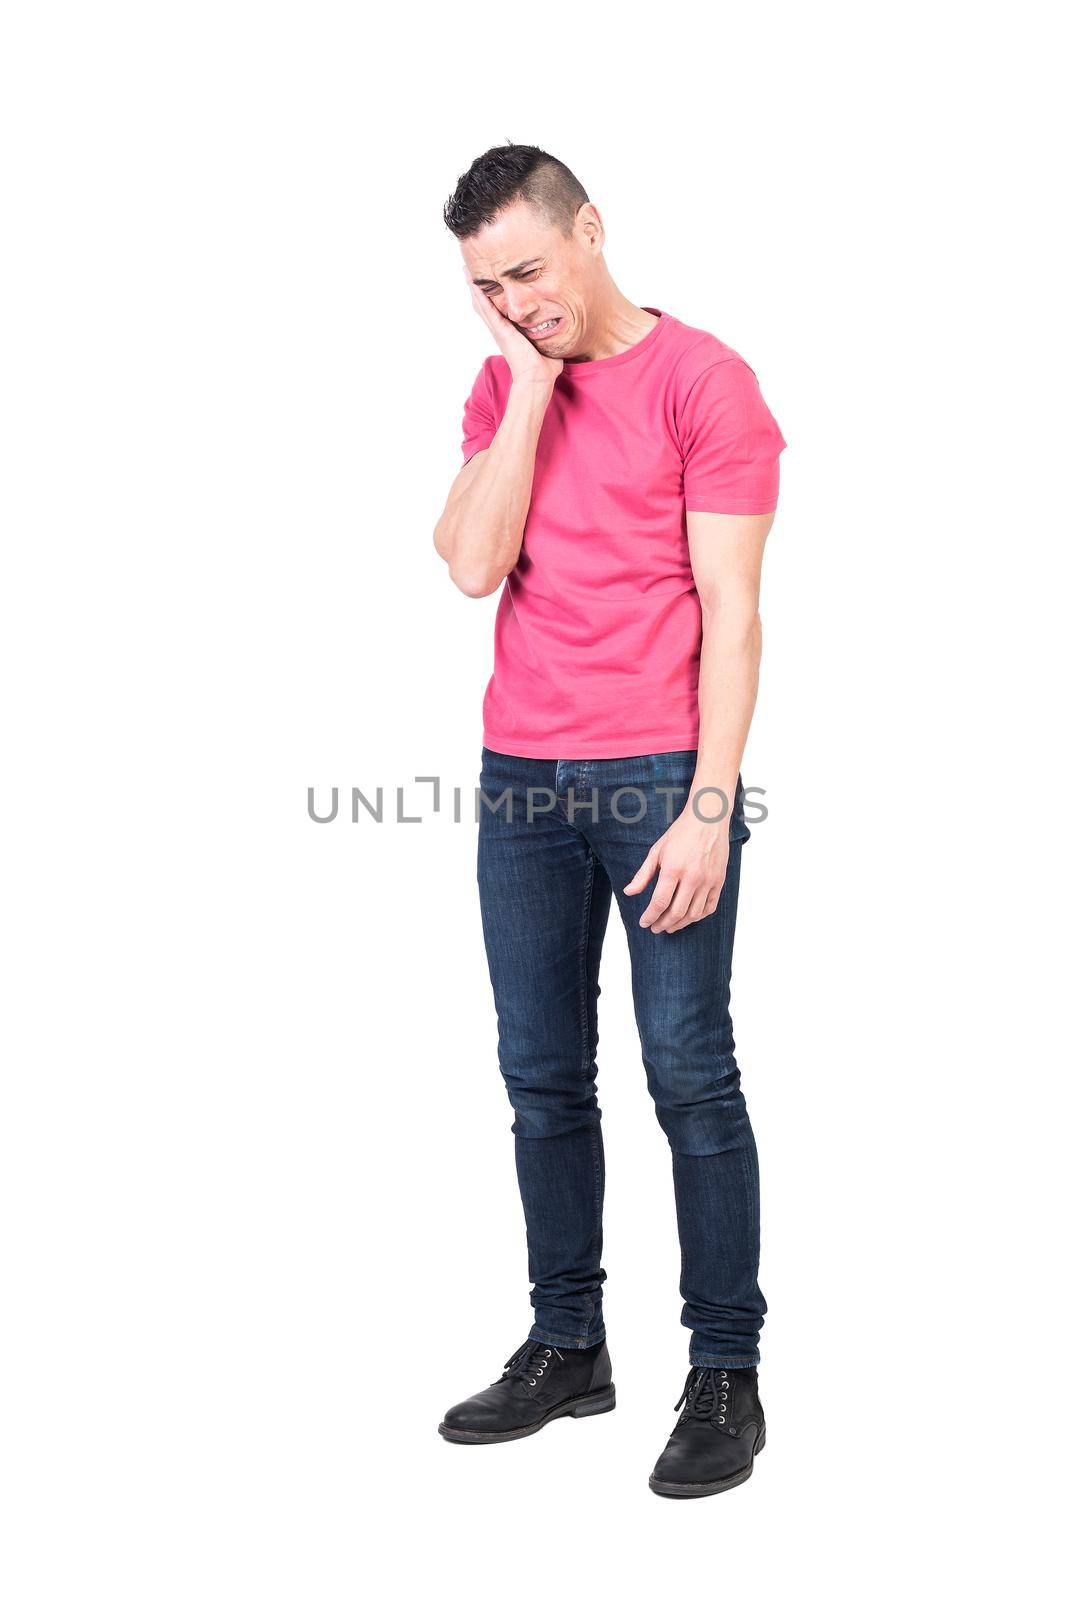 Full body of sorrowful young male with dark hair in casual clothes touching cheek and crying against white background